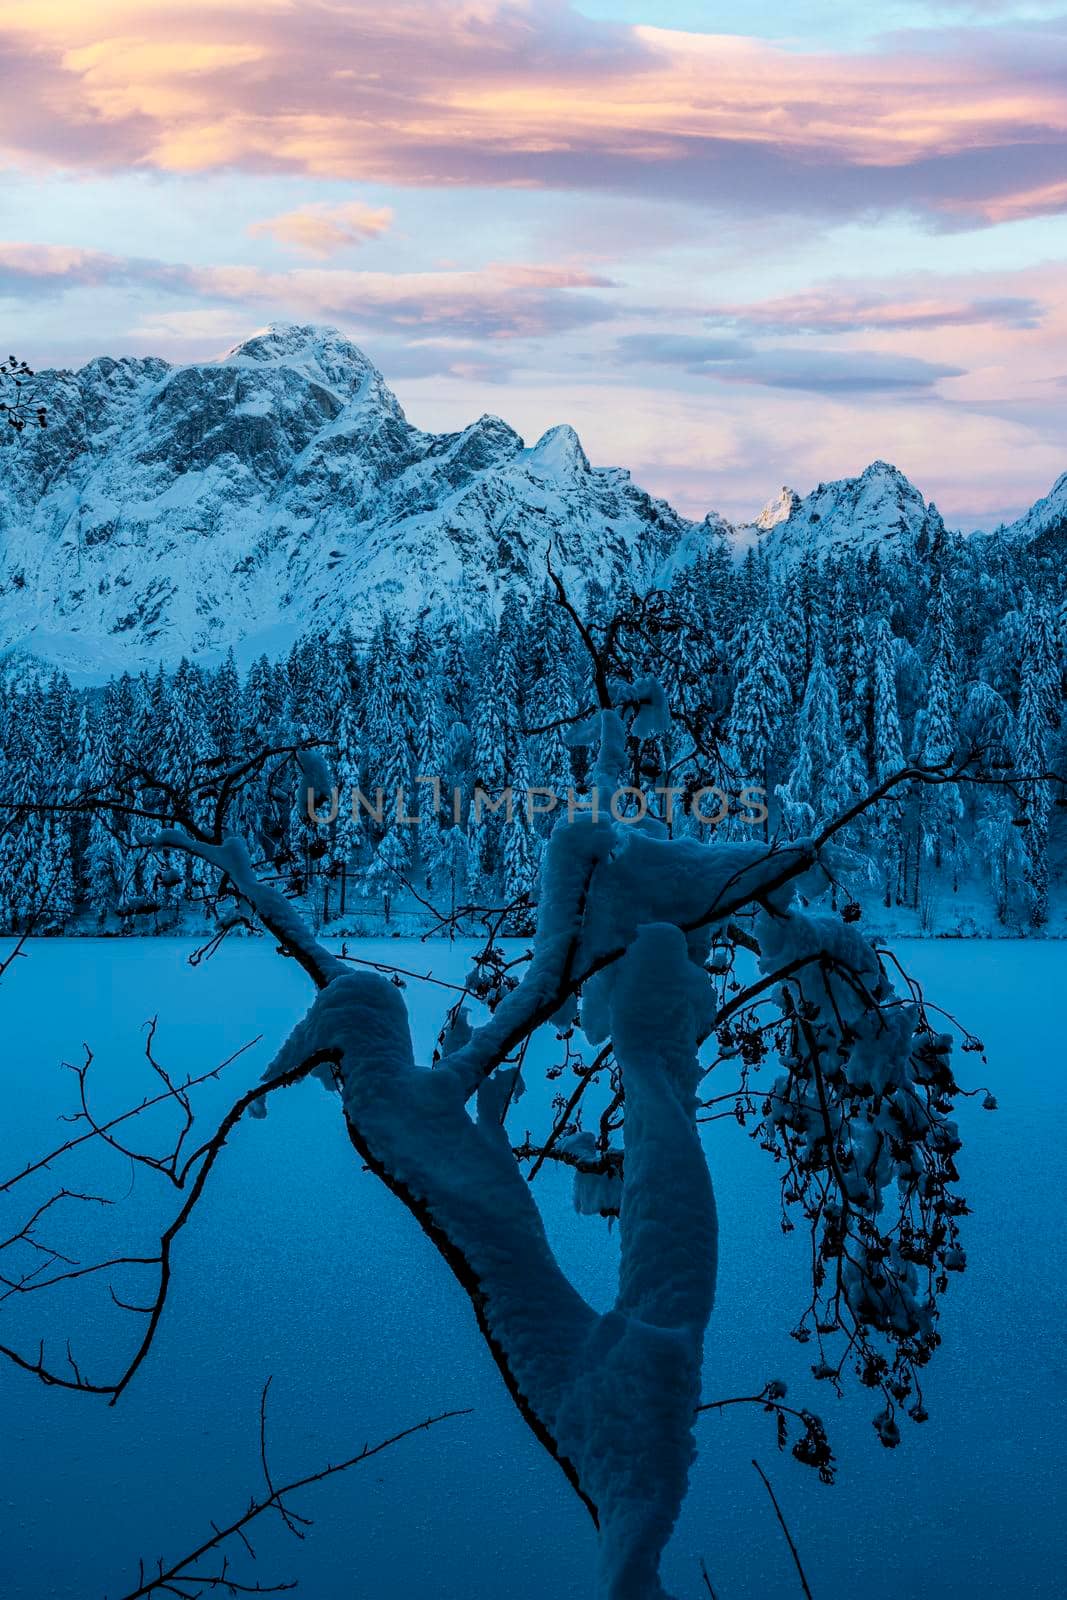 Winter at Fusine lake, Italy  by sergiodv